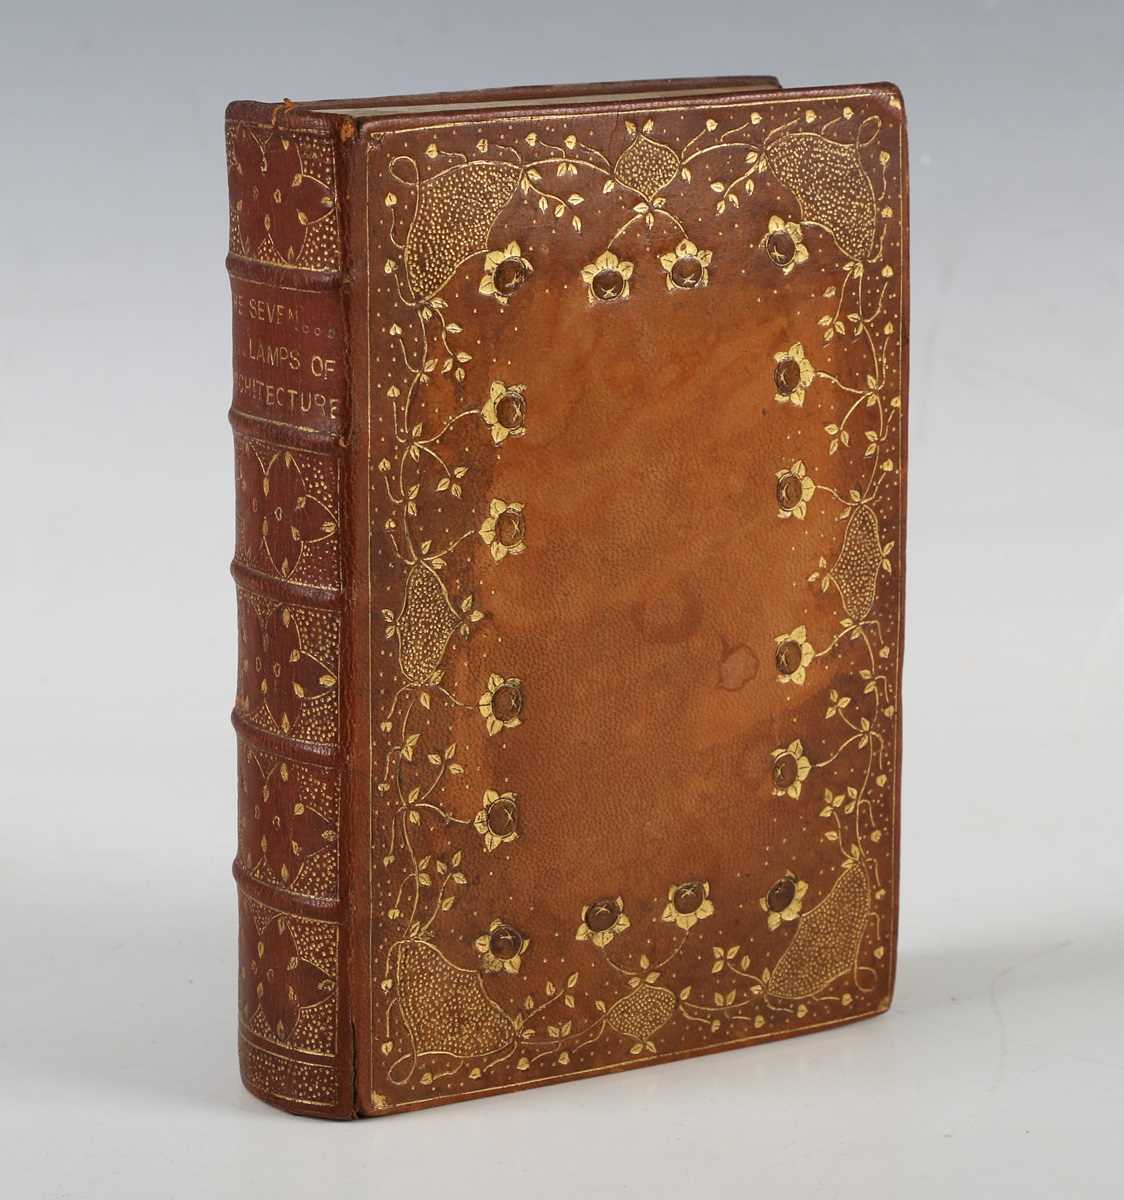 BINDING. – John RUSKIN. The Seven Lamps of Architecture. Orpington and London: George Allen, 1900.